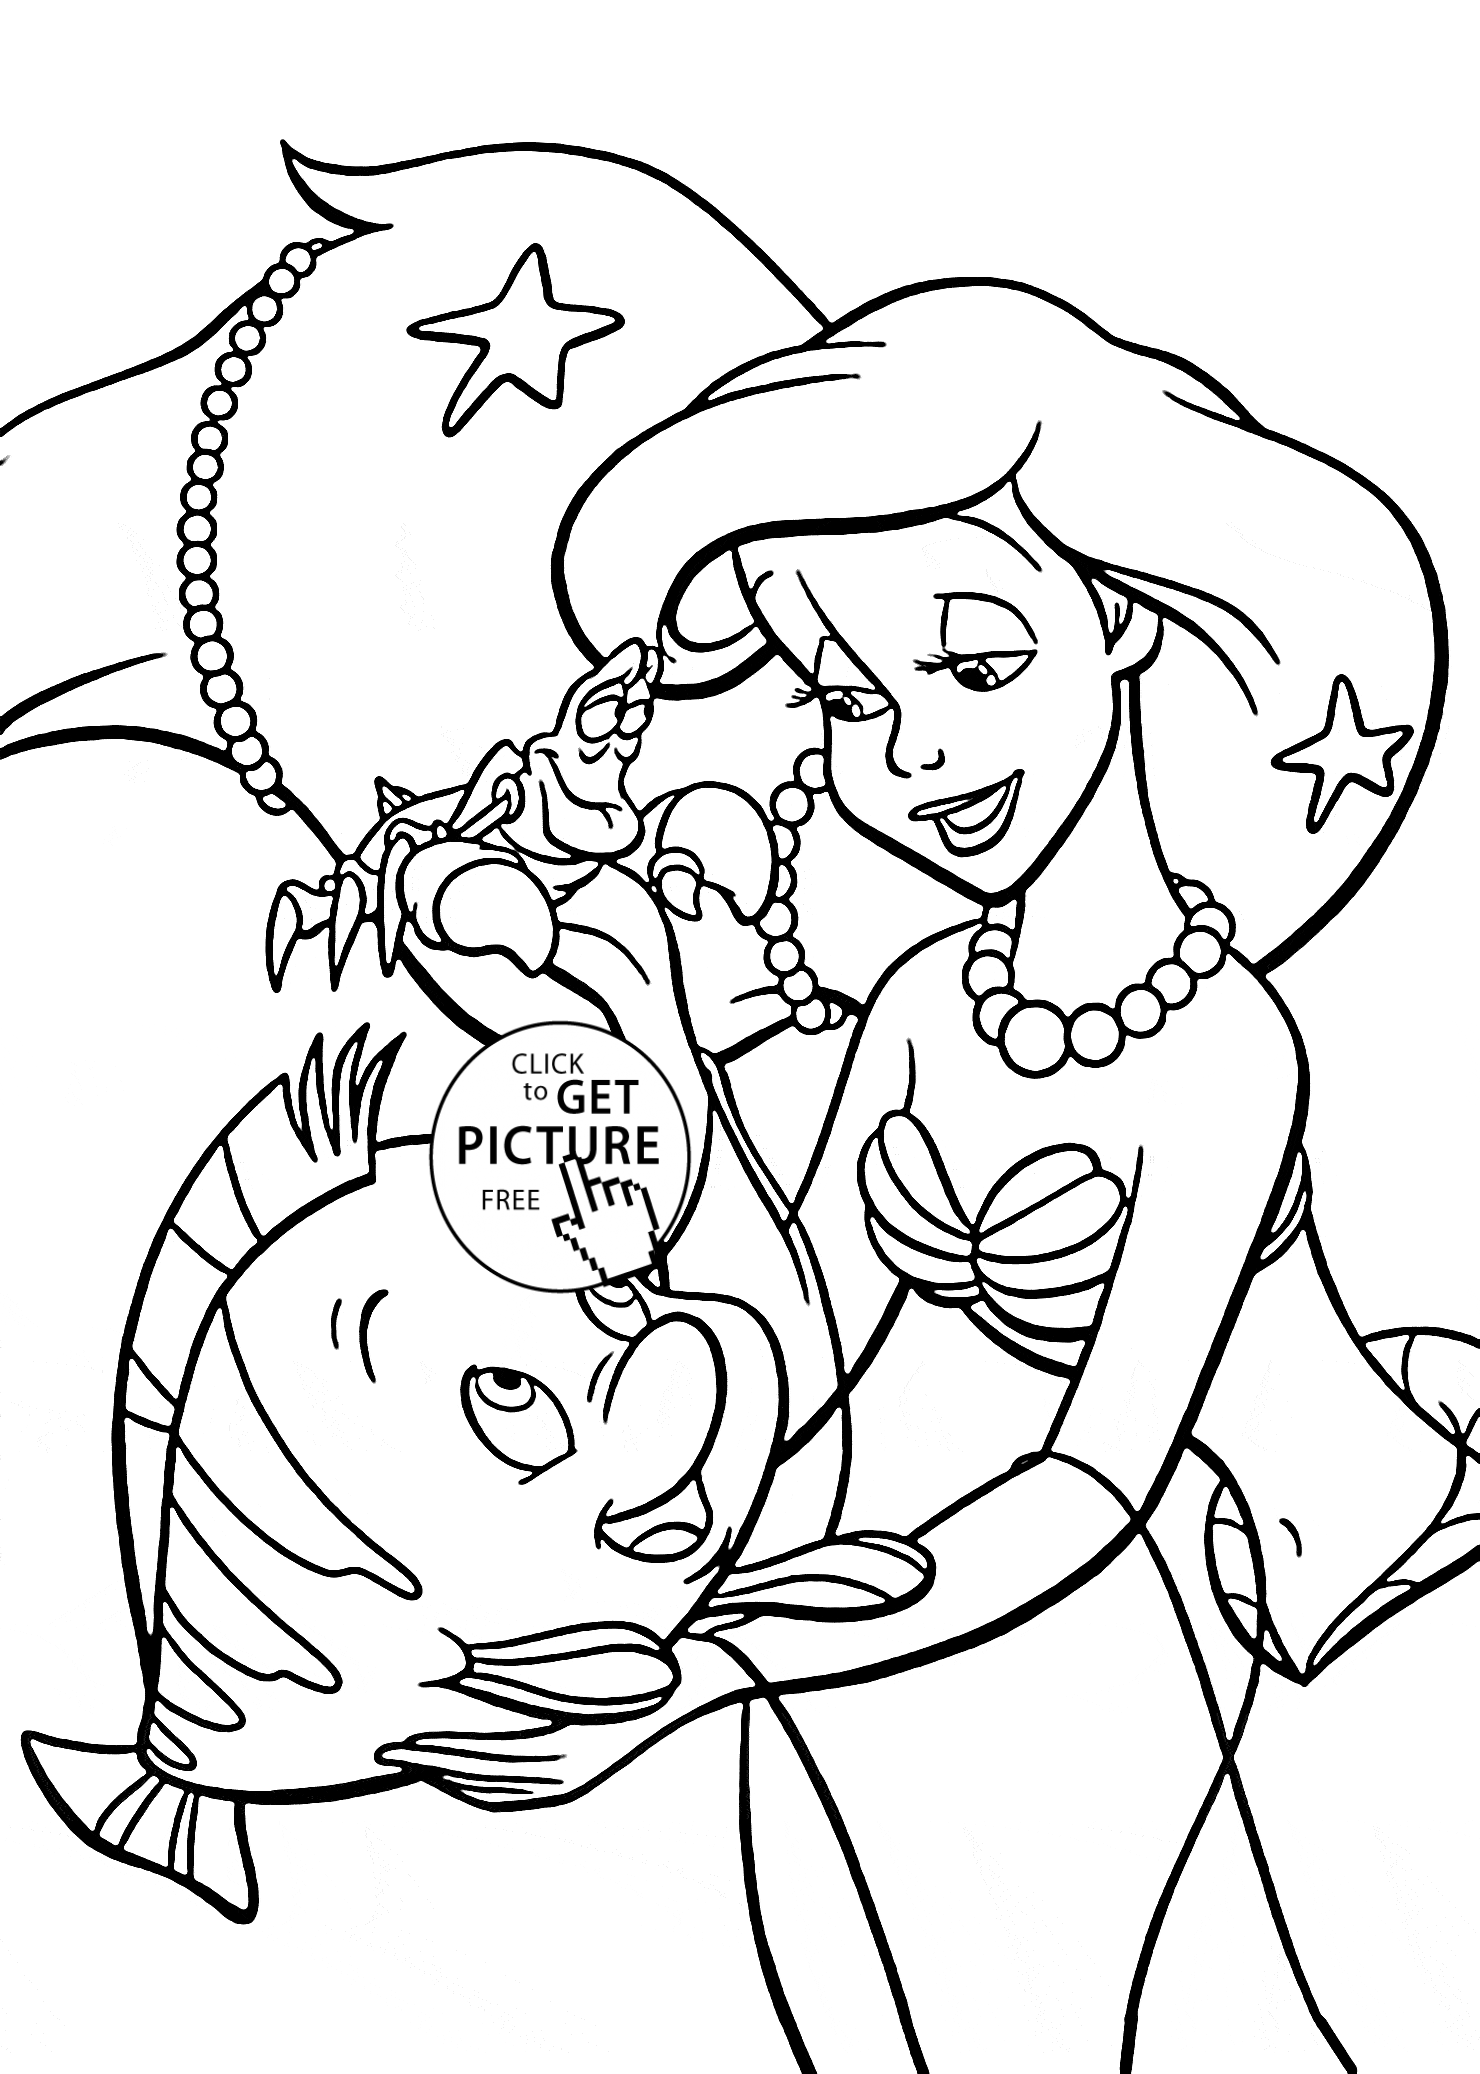 full page printable coloring pages full page coloring pages getcoloringpagescom coloring full pages page printable 